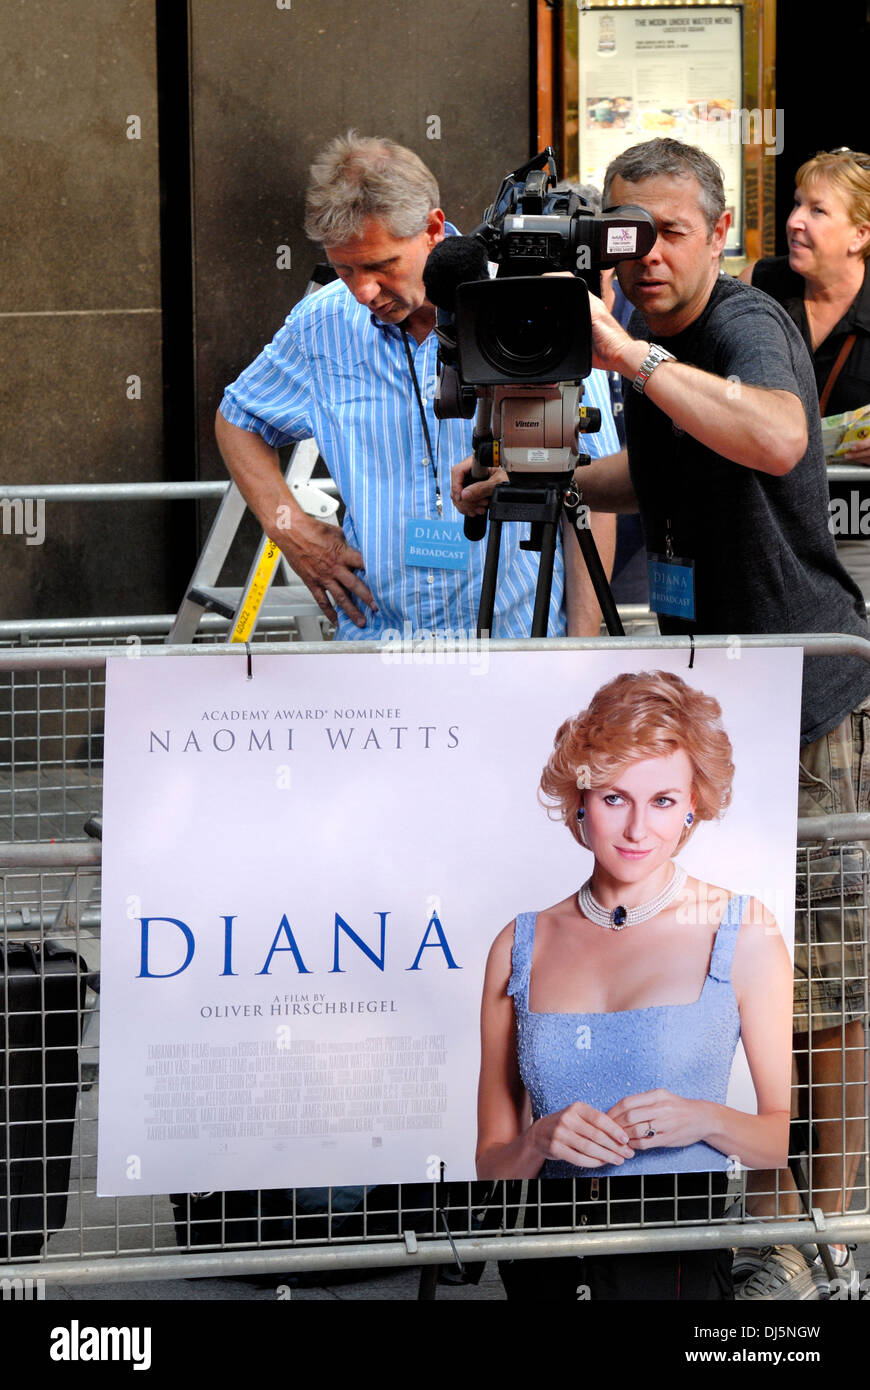 Cameraman preparing before the World Premier of the film 'Diana' (Odeon, Leicester Square, London, 5th Sept 2013) Stock Photo